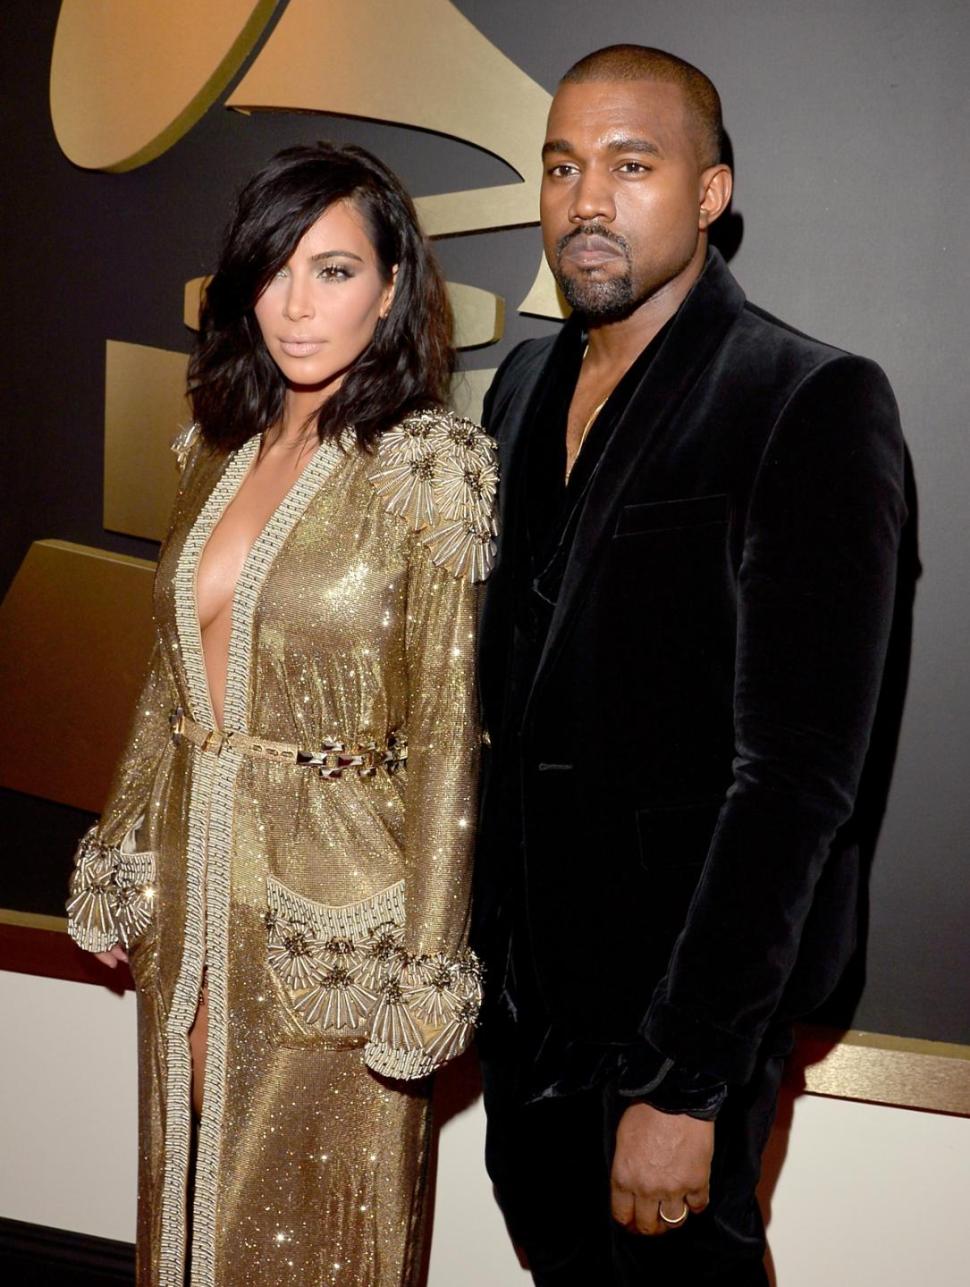 Kim Kardashian and Kanye West attend the 57th Annual Grammy Awards at the Staples Center Sunday in Los Angeles.